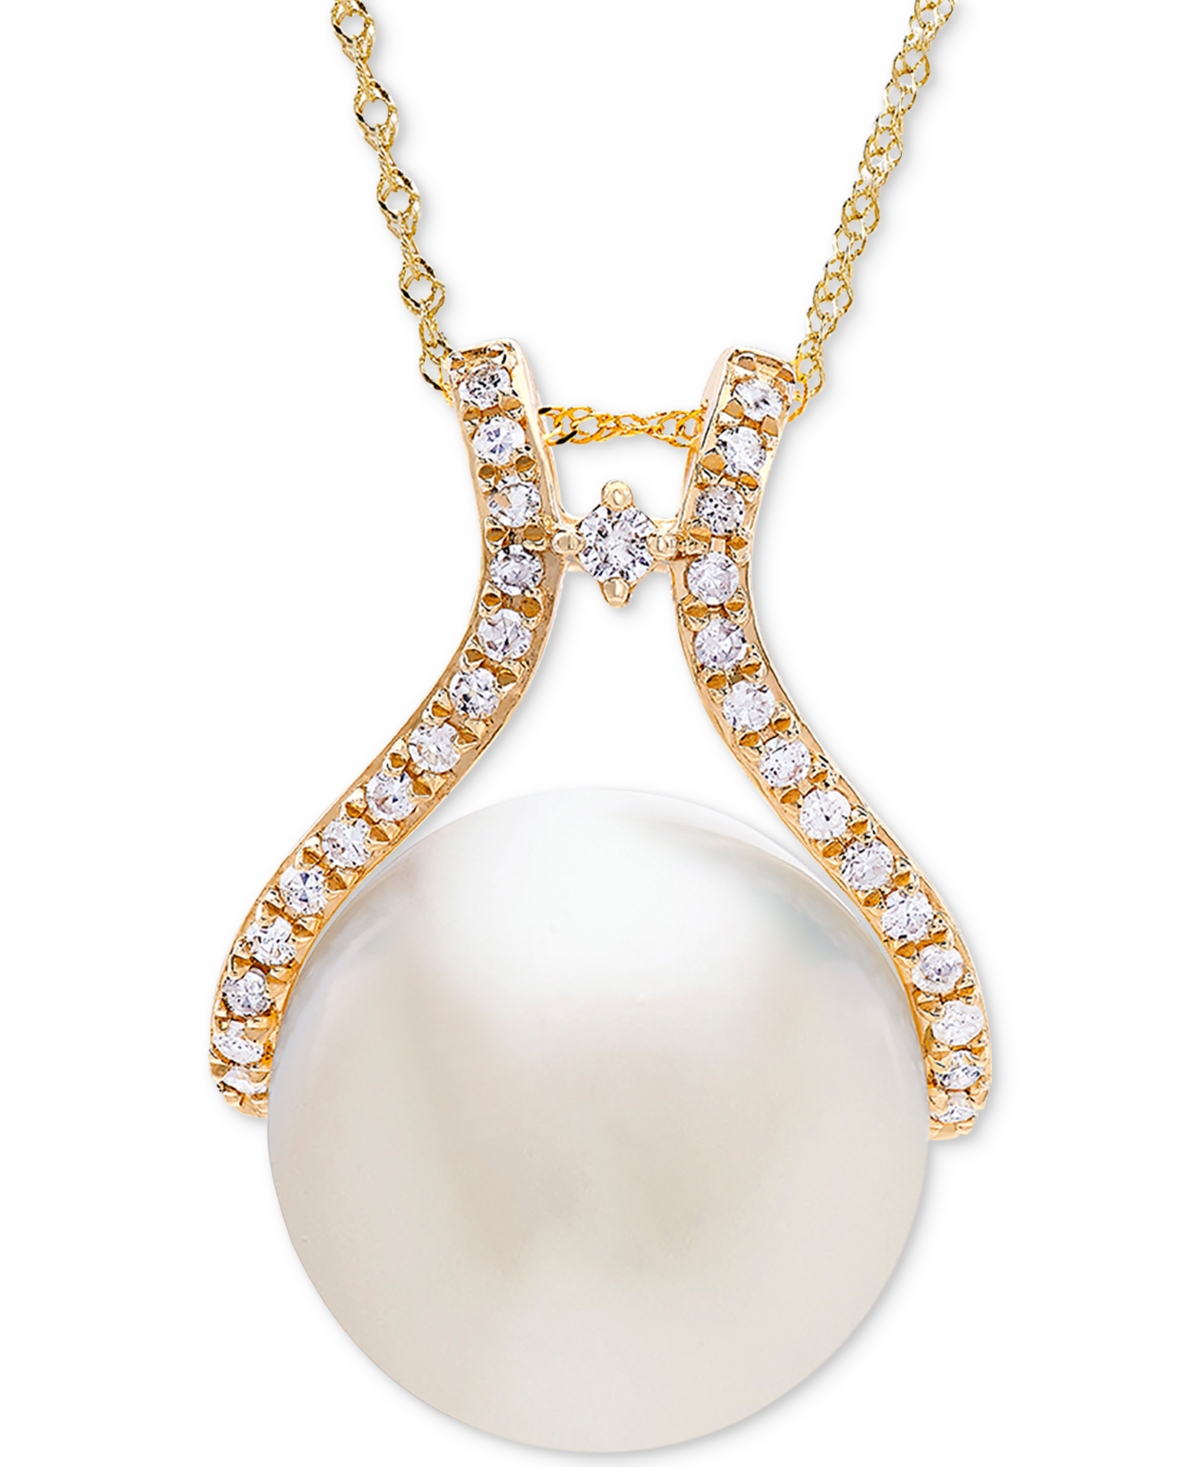 Cultured White Ming Pearl (10mm) & Diamond (1/5 ct. t.w.) Pendant Necklace in 14k Gold - White